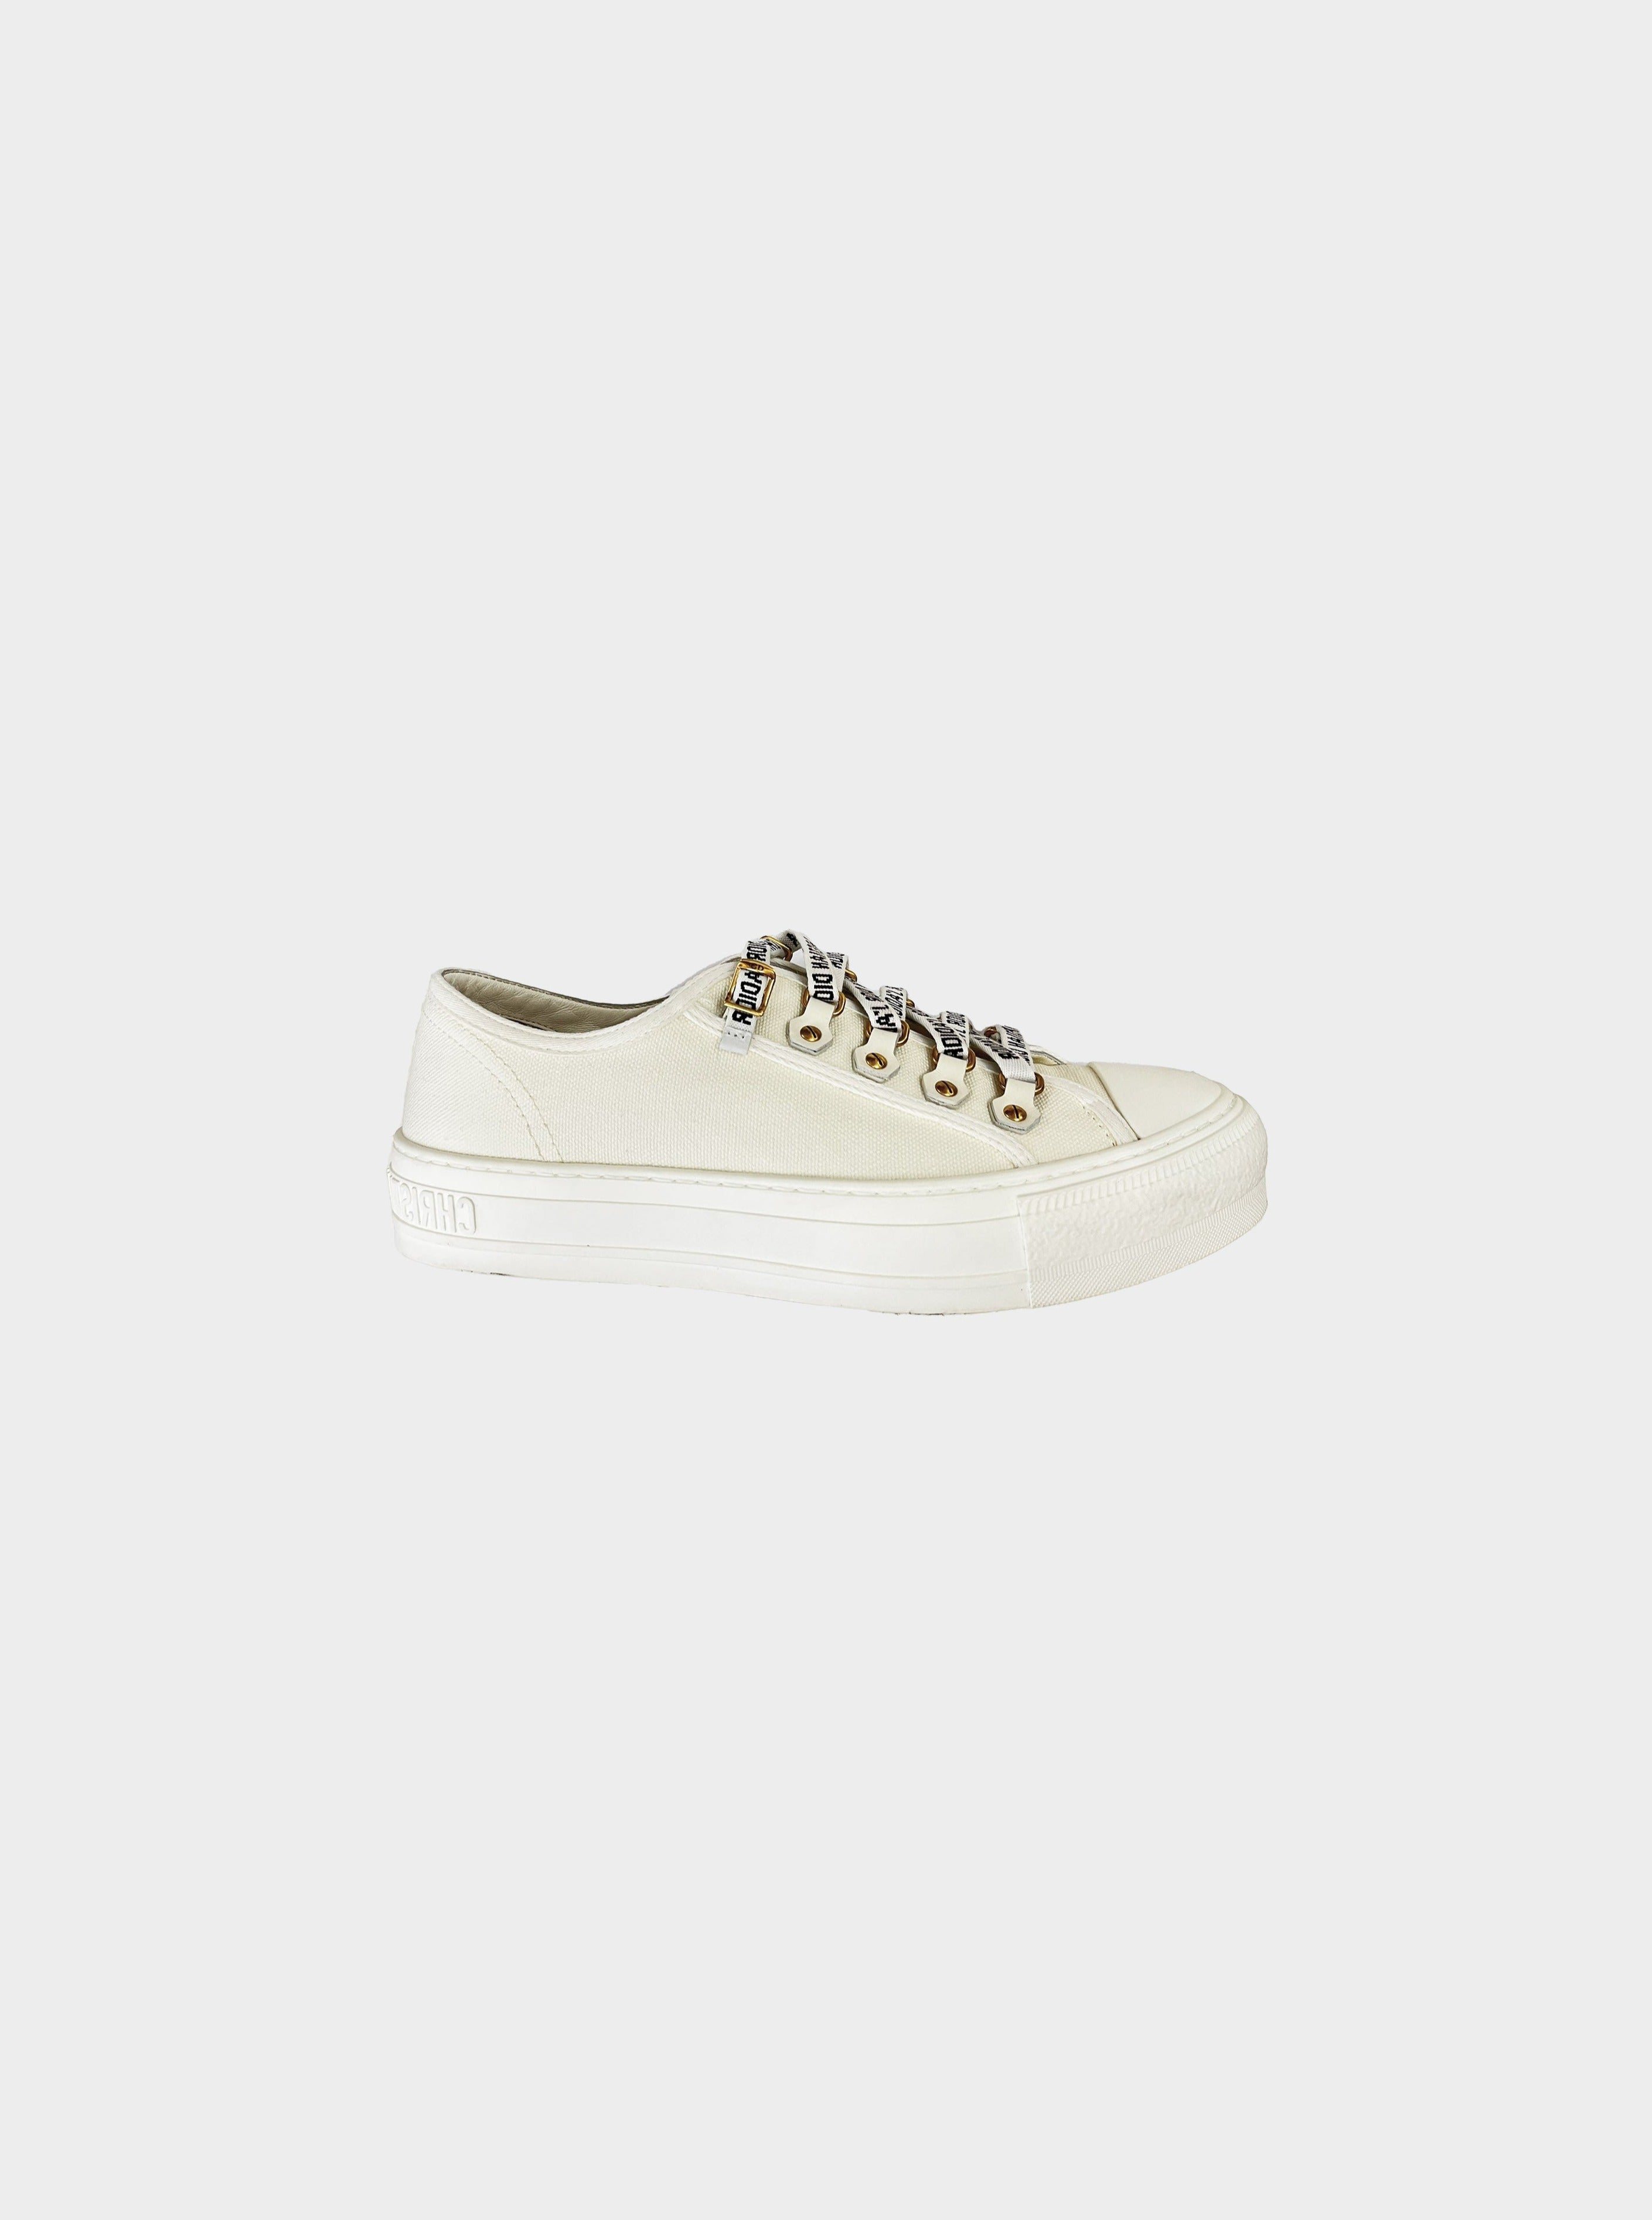 Christian Dior 2018 White Canvas Walk'N'Dior Low Top Sneakers